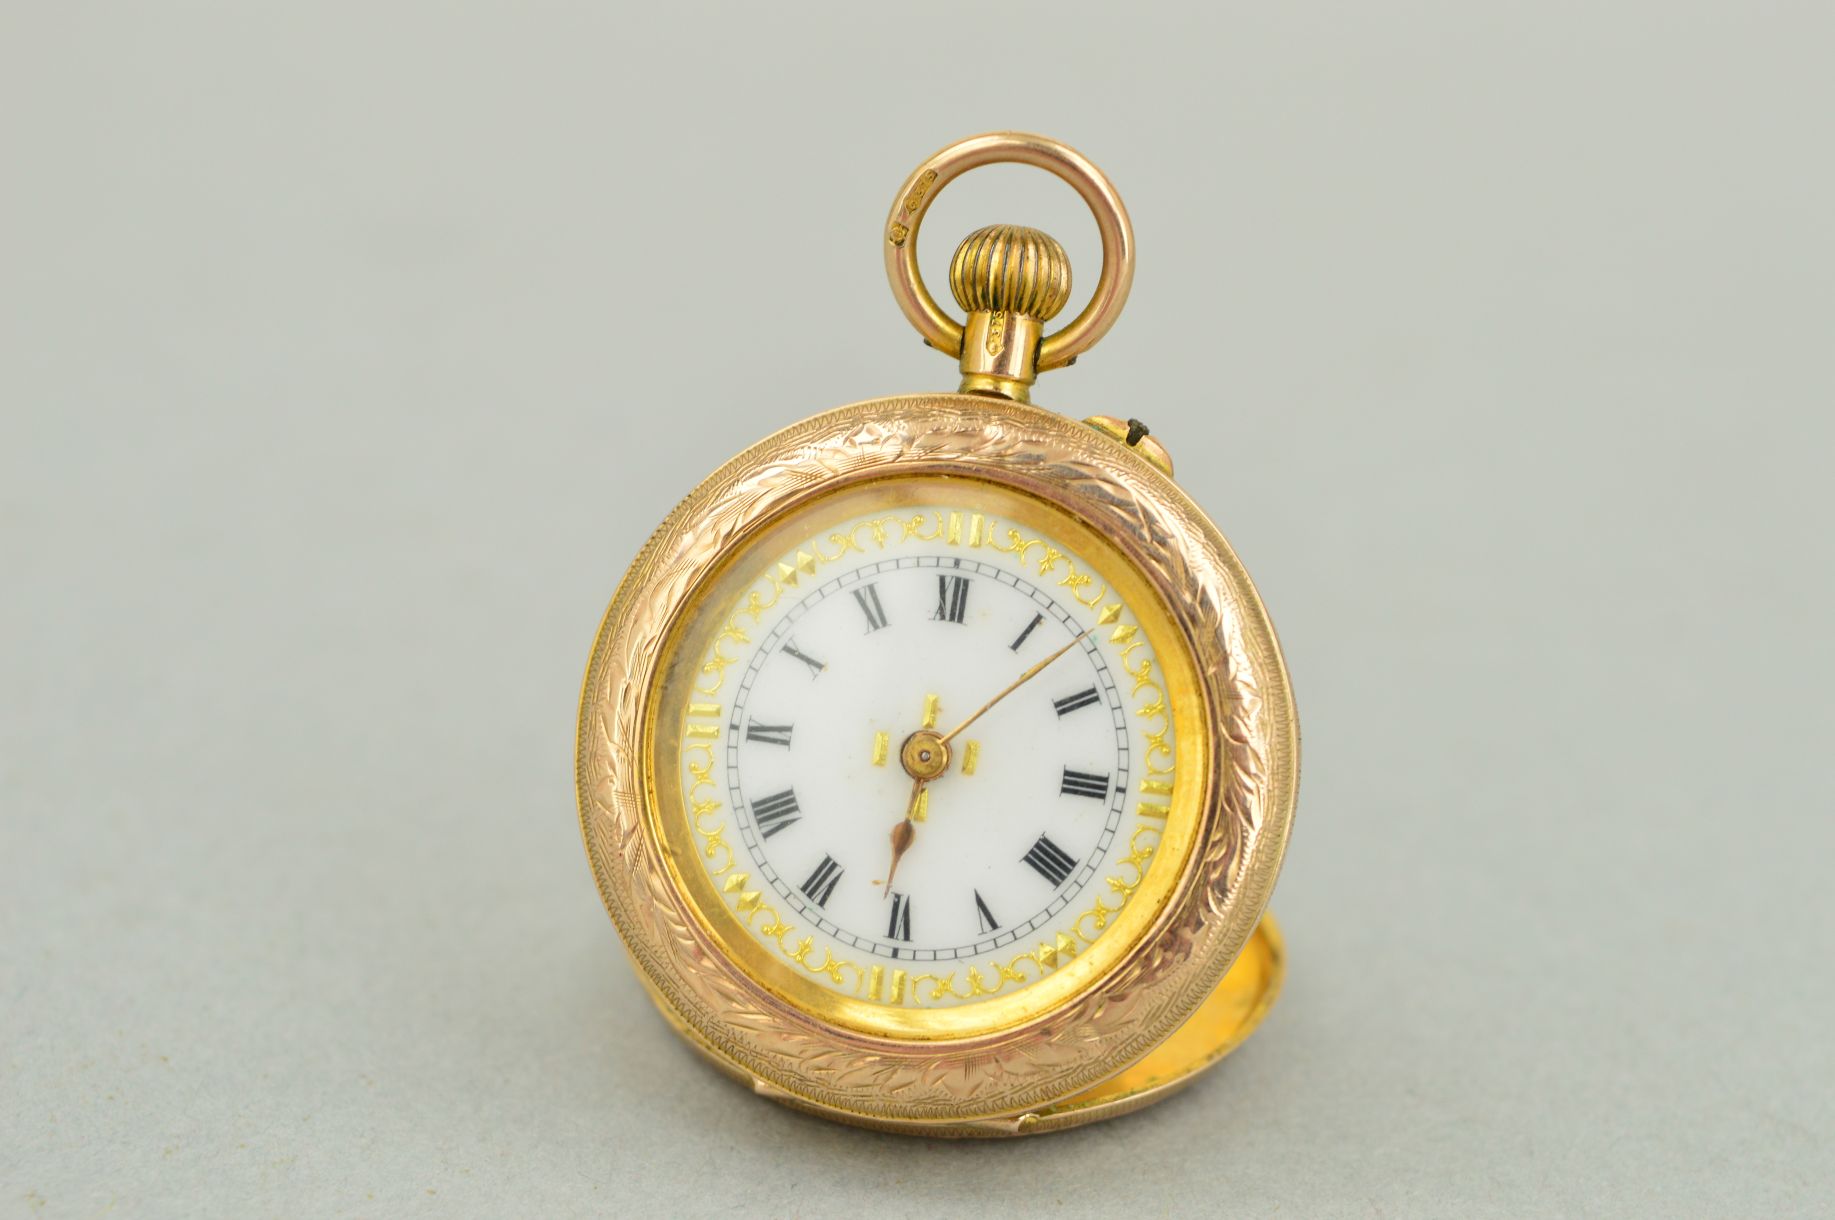 AN EARLY 20TH CENTURY 9CT GOLD SMALL POCKET WATCH, white gold inlaid enamel dial with black Roman